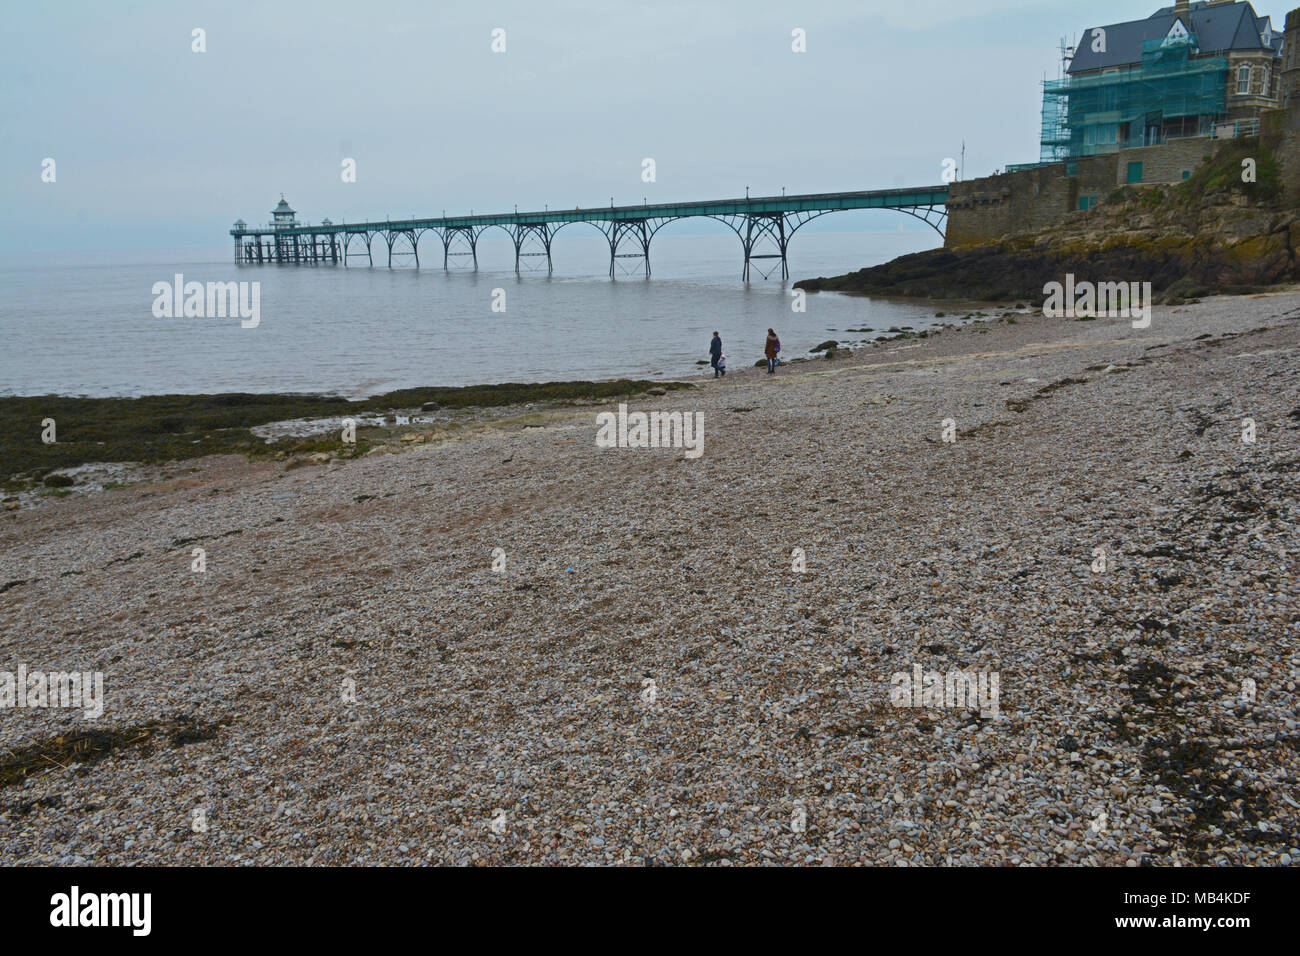 North Somerset, UK. 7th April 2018. UK Weather.WOW... On a mild April day, the beach at Clevedon sea front with the world Famous Pier in the background is FREE FROM PLASTIC general litter and rubbish. Robert Timoney/Alamy/Live/News Stock Photo